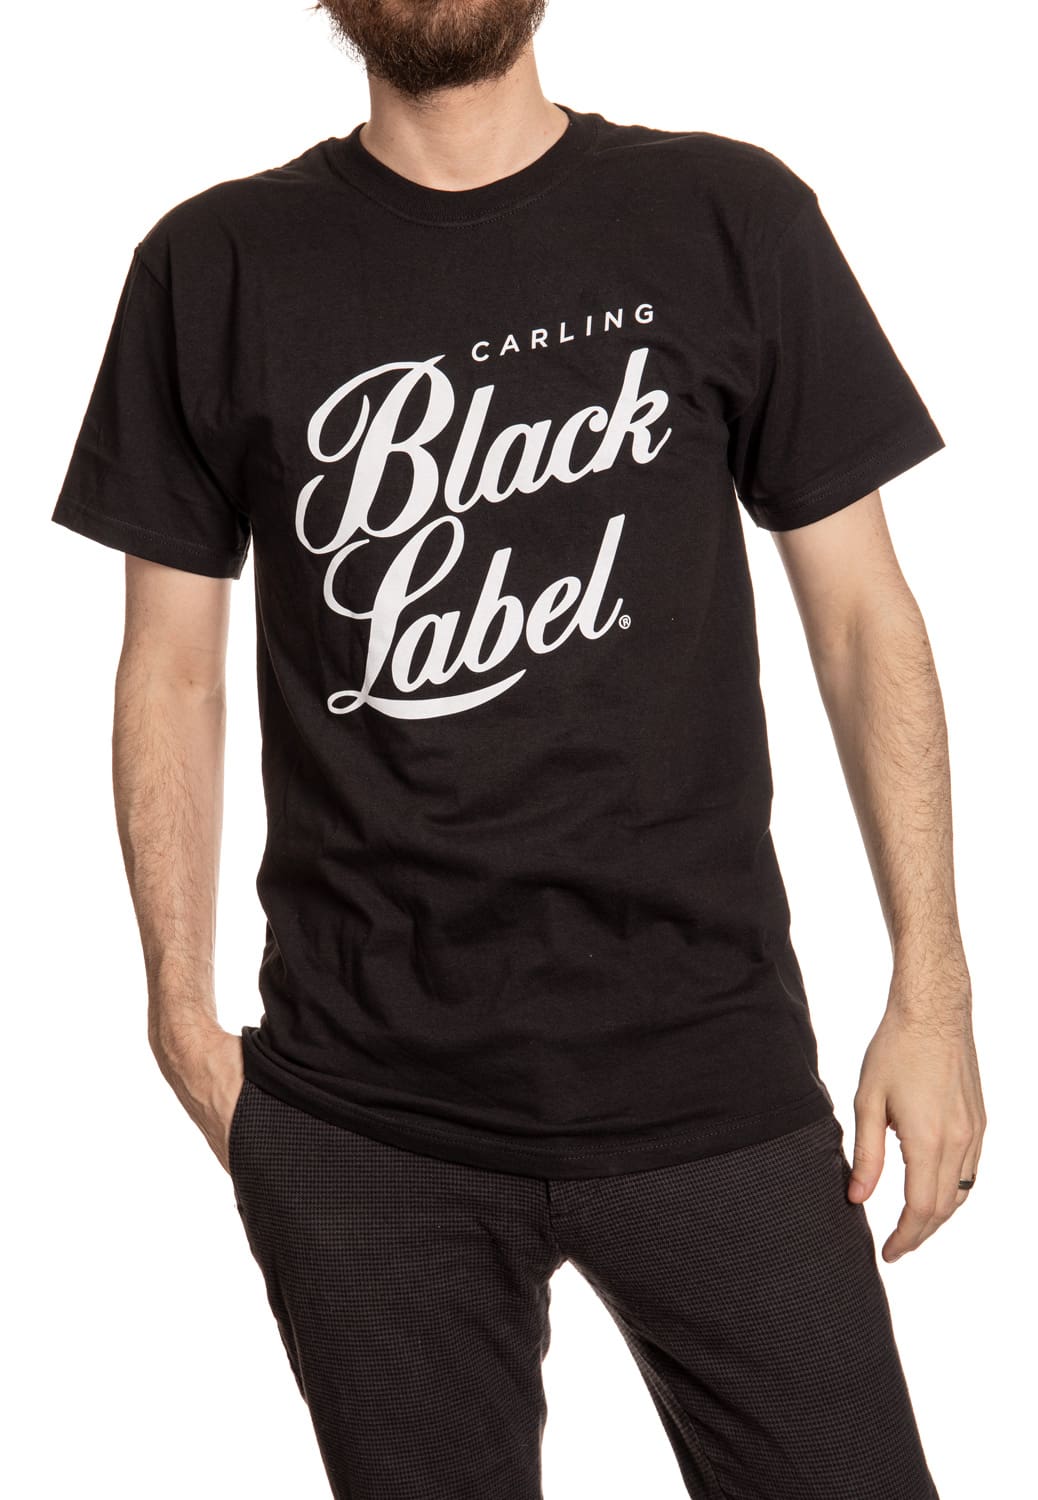 Carling Black Label T-Shirt on Black Front View